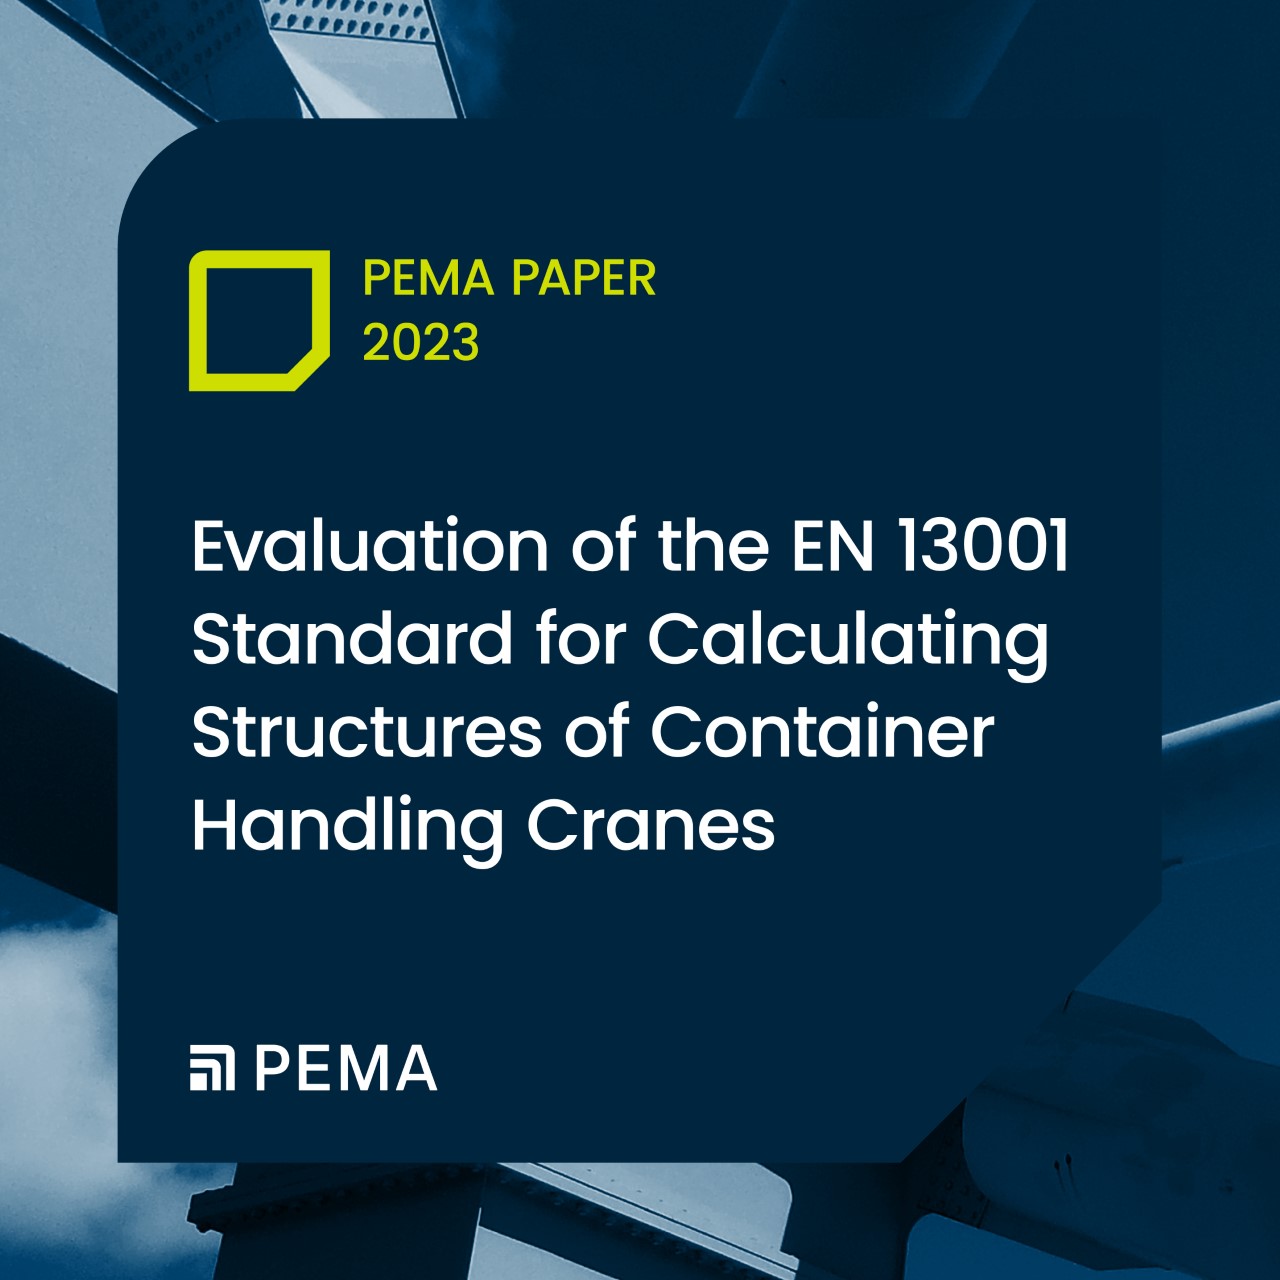 PEMA Published IP27 Evaluation of the EN 13001 Standard for Calculating Structures of Container Handling Cranes